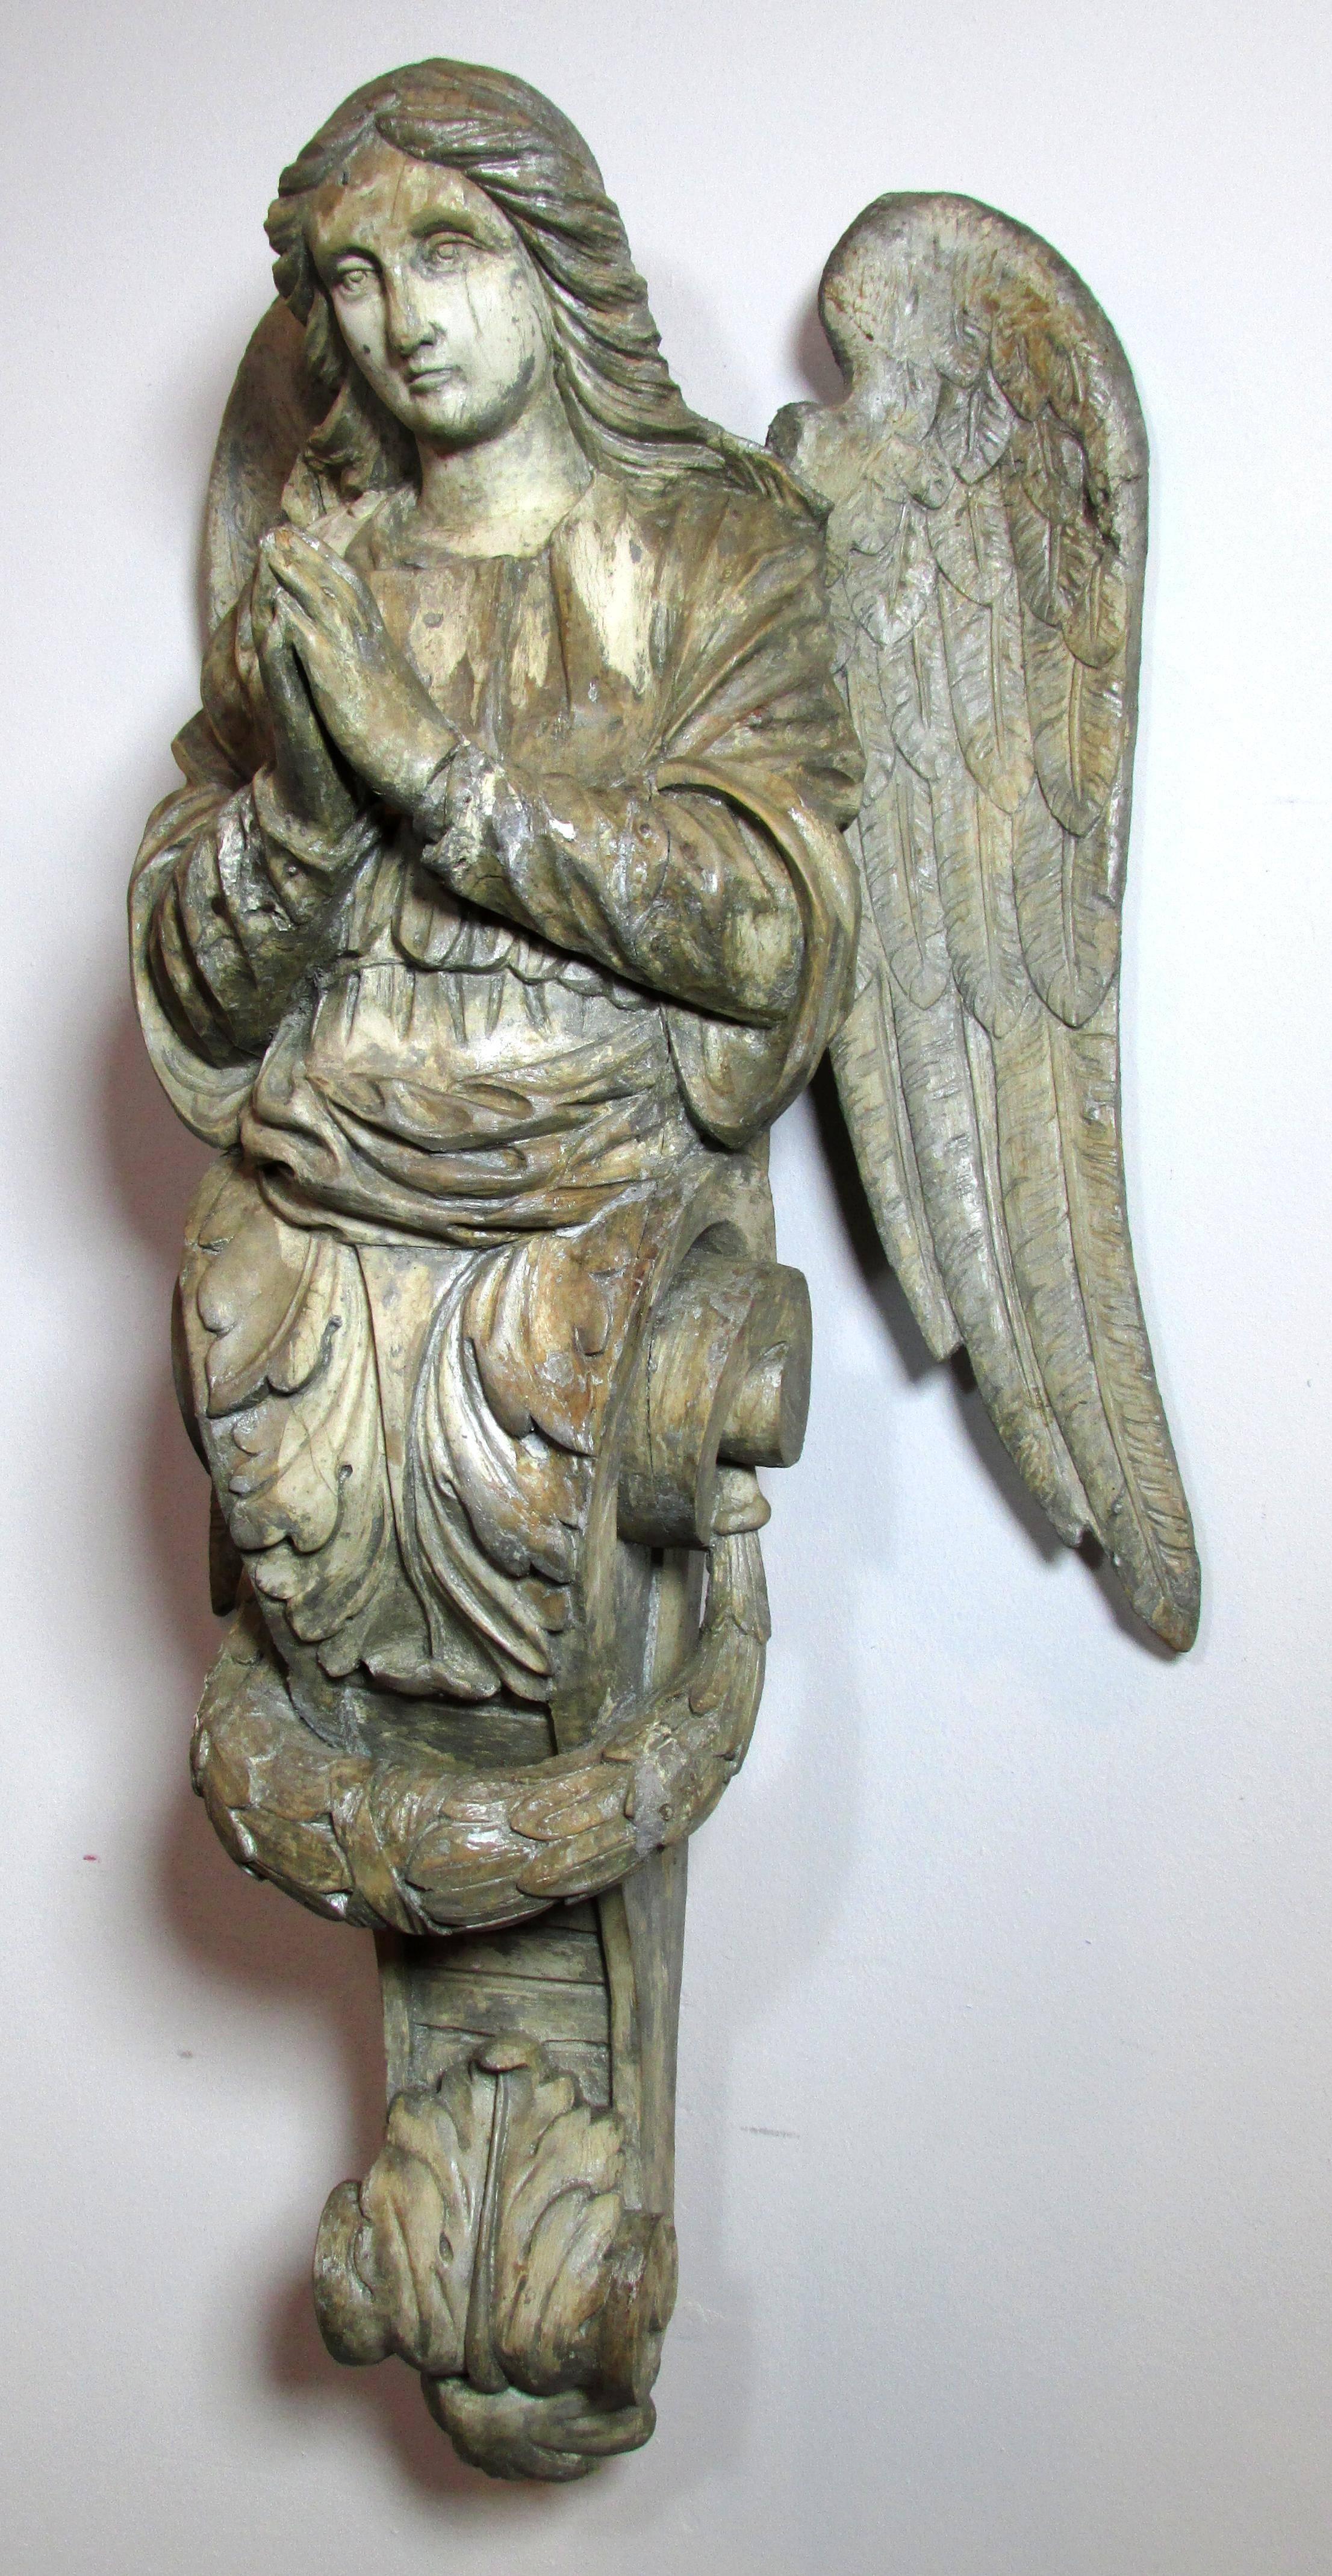 Carved wooden architectural element of an angel painted with gesso and remnants of silver paint.